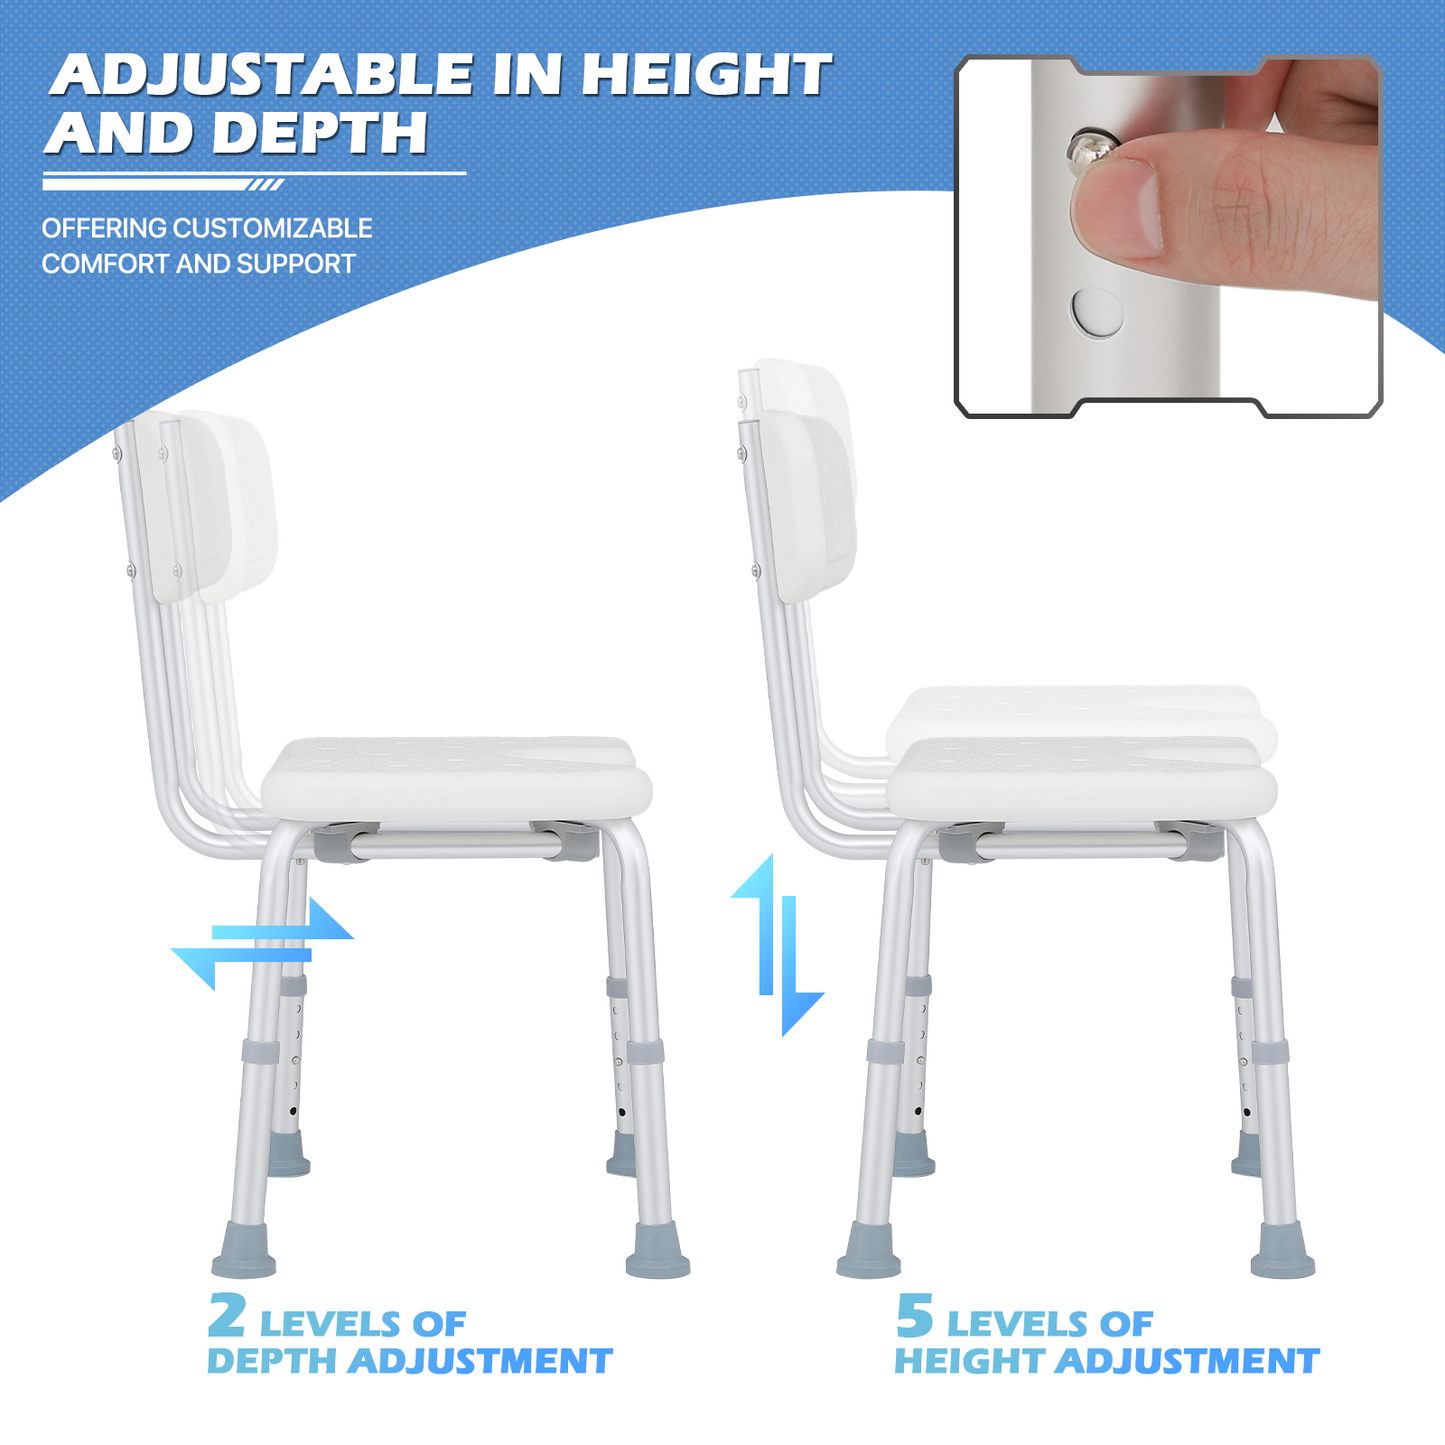 Shower Chair - 27''-31'' 5 Gears Height Adjustable - U-shaped Cutout Seat - White/Silver